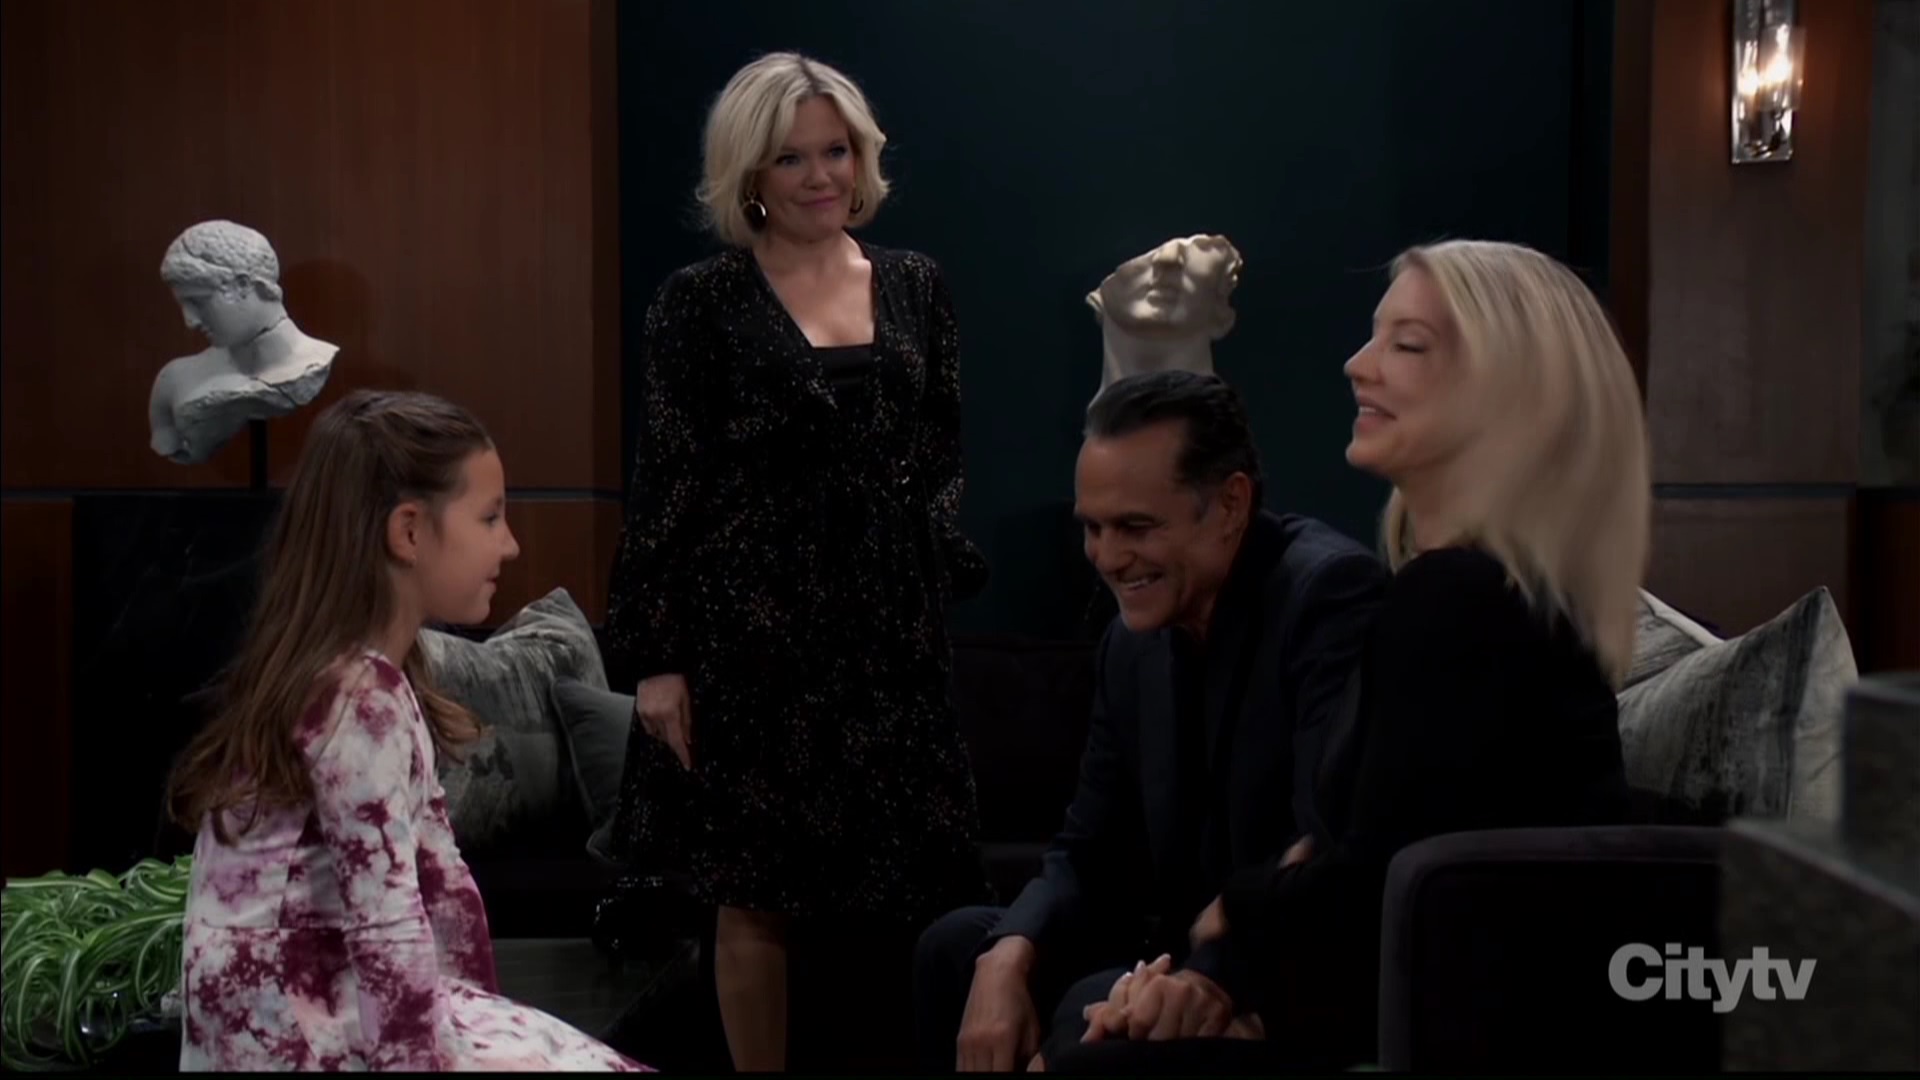 ava watches sonny and nina tell avery about the engagement.